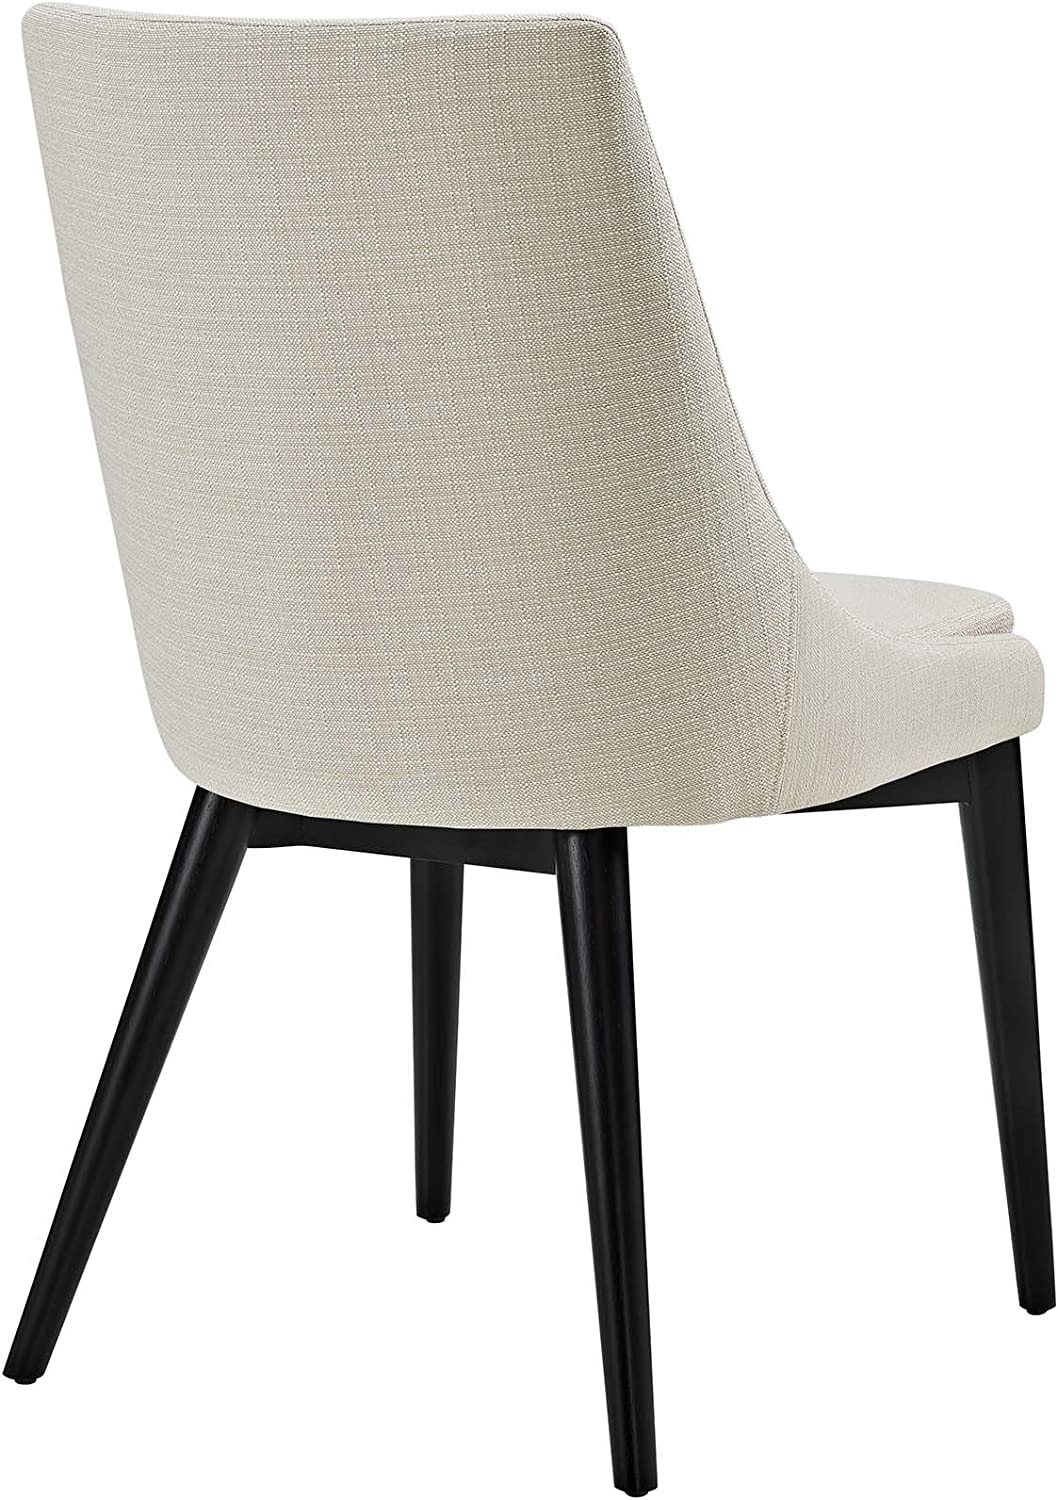 Modway Viscount Mid-Century Modern Upholstered Fabric Kitchen and Dining Room Chair in Wheatgrass